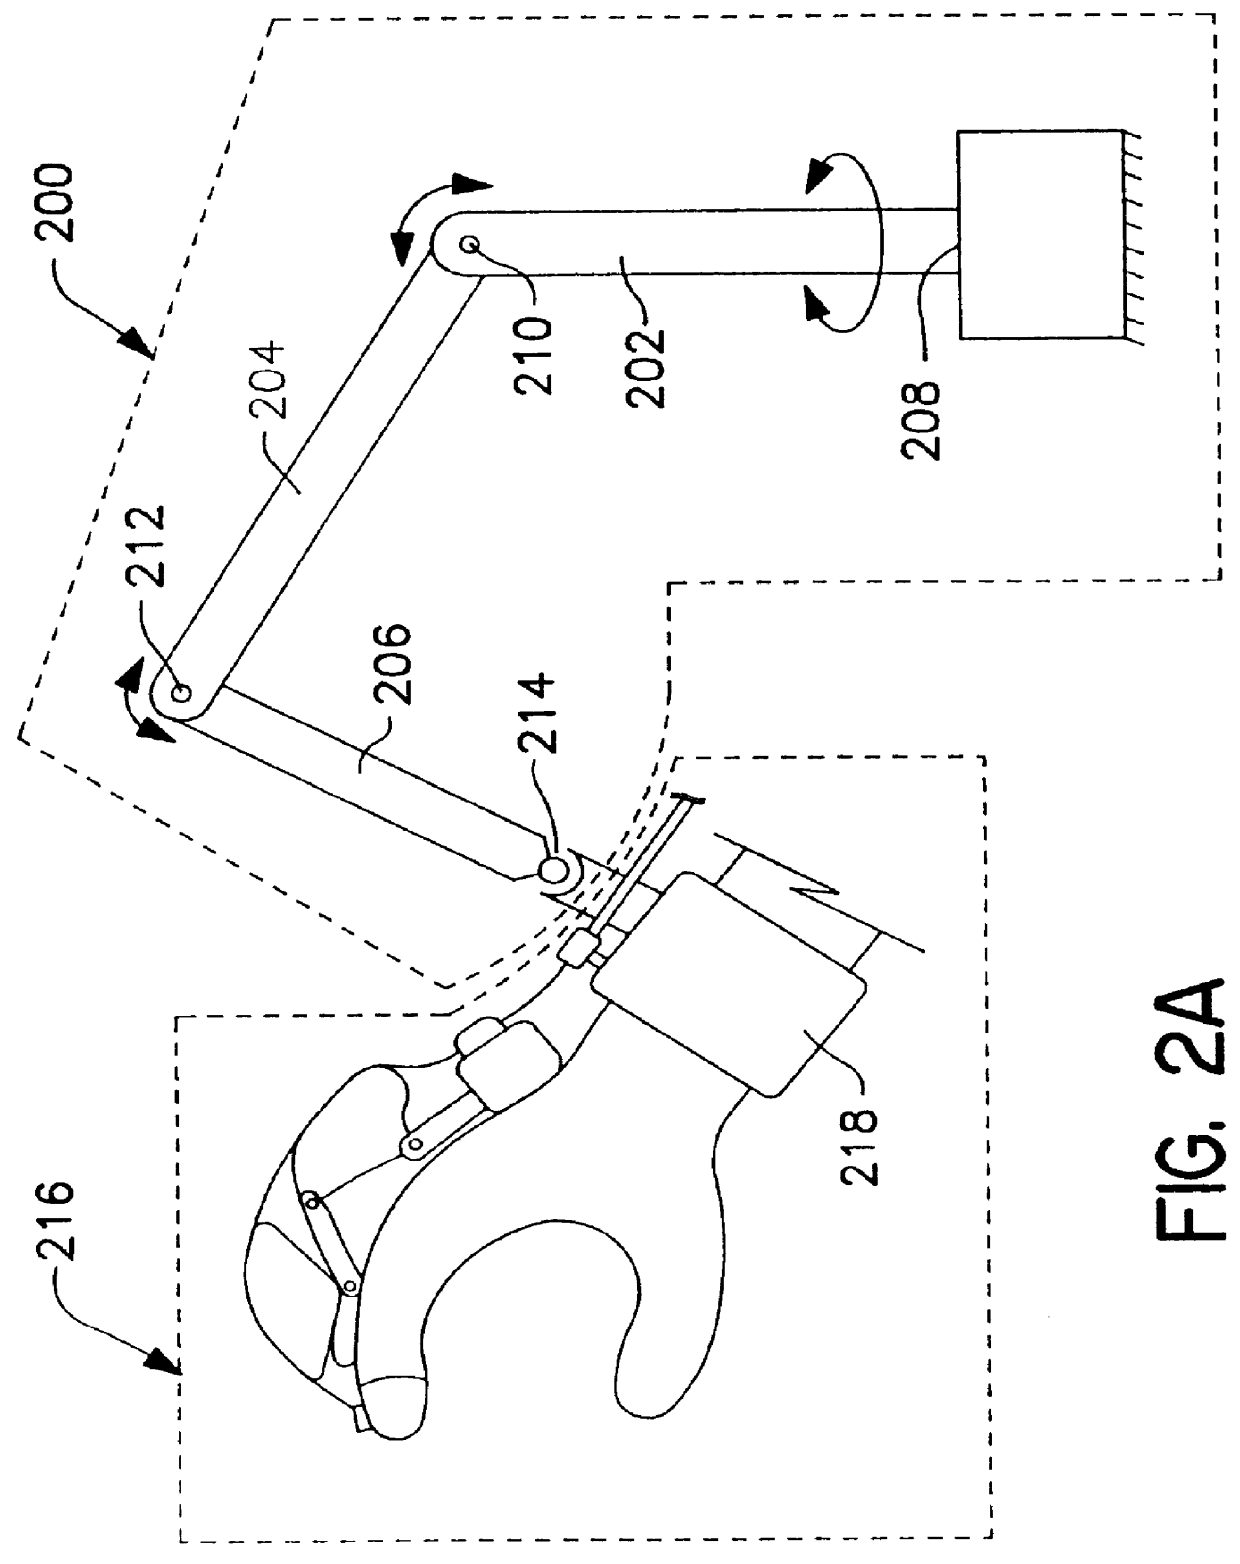 Force-feedback interface device for the hand